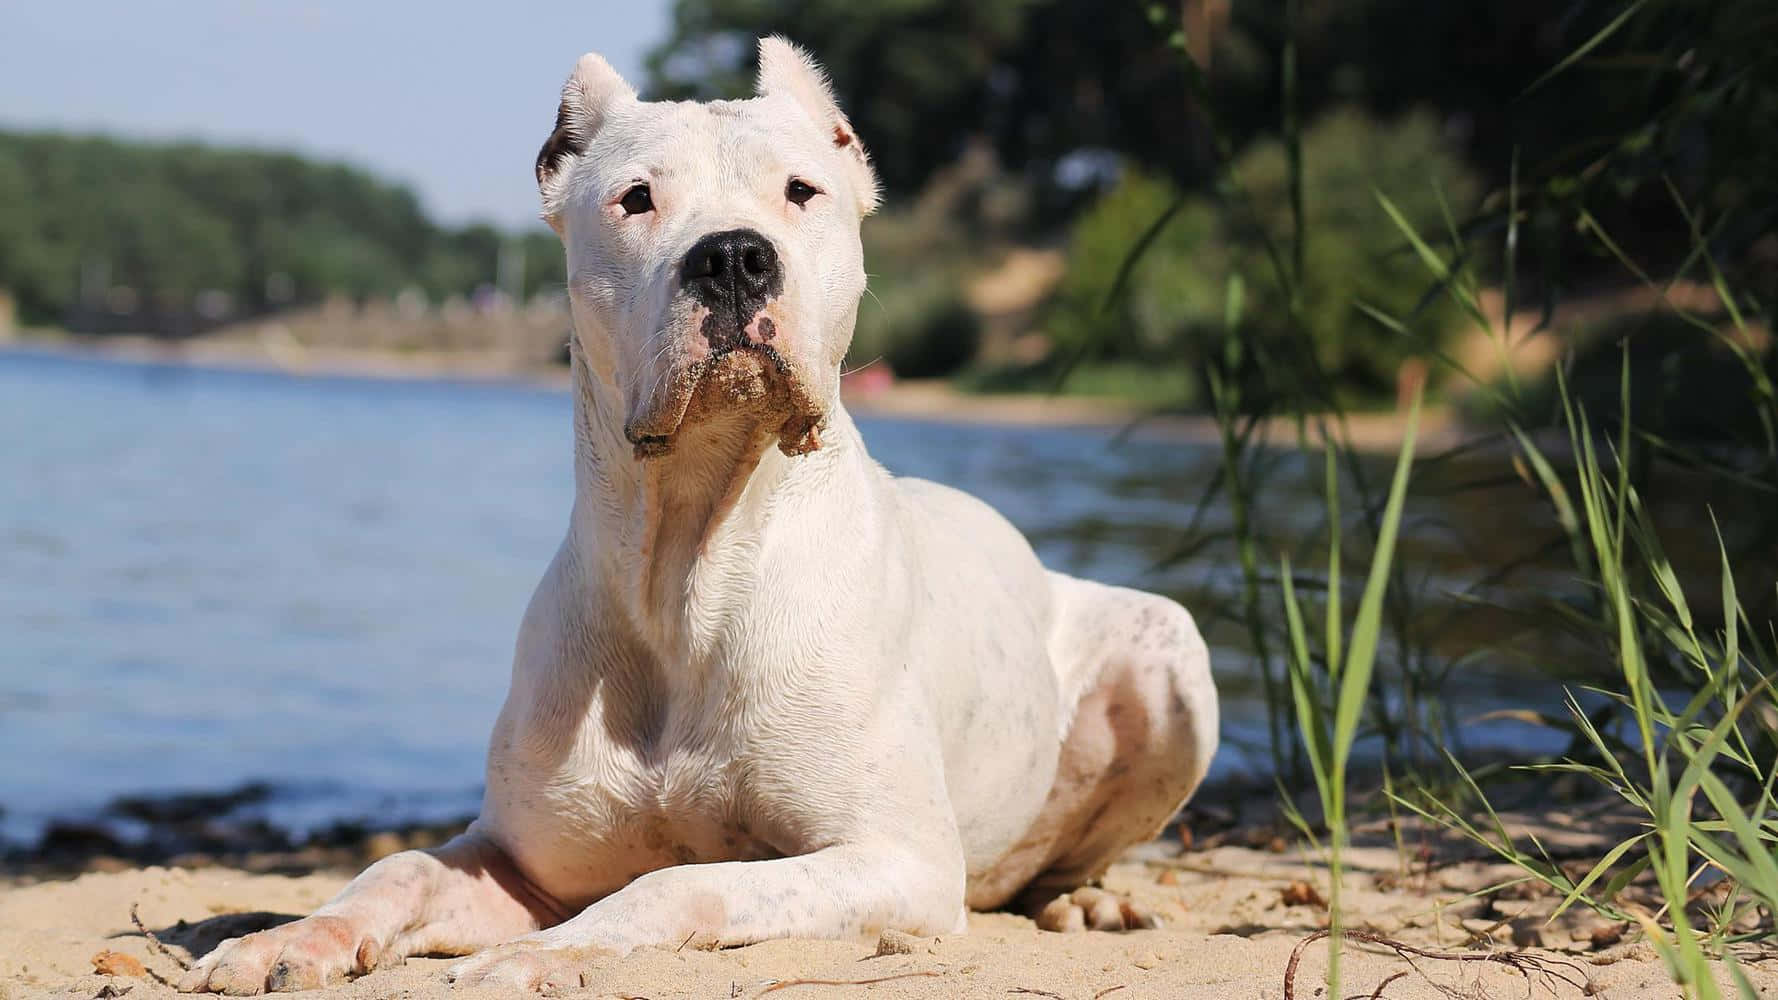 A White Dog Is Sitting On The Sand Near A Body Of Water